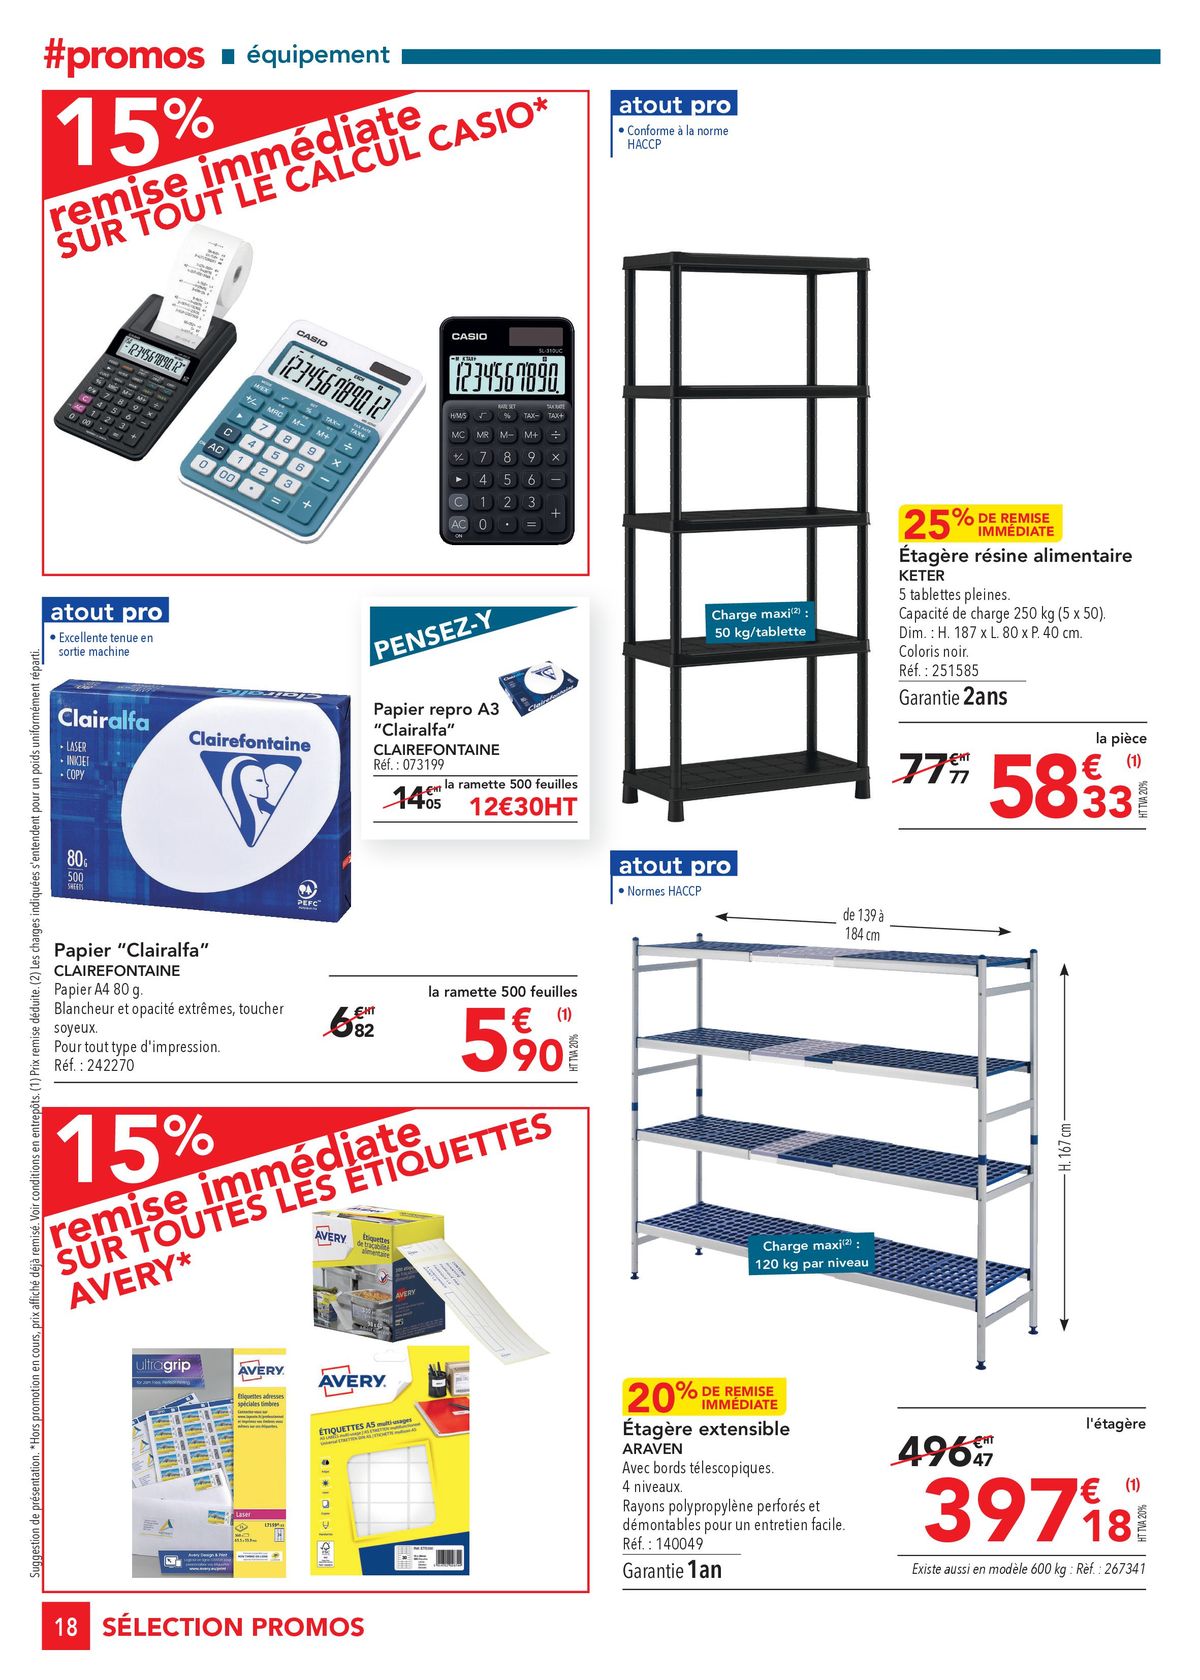 Catalogue SELECTION-PROMO-EQUIPEMENT, page 00018